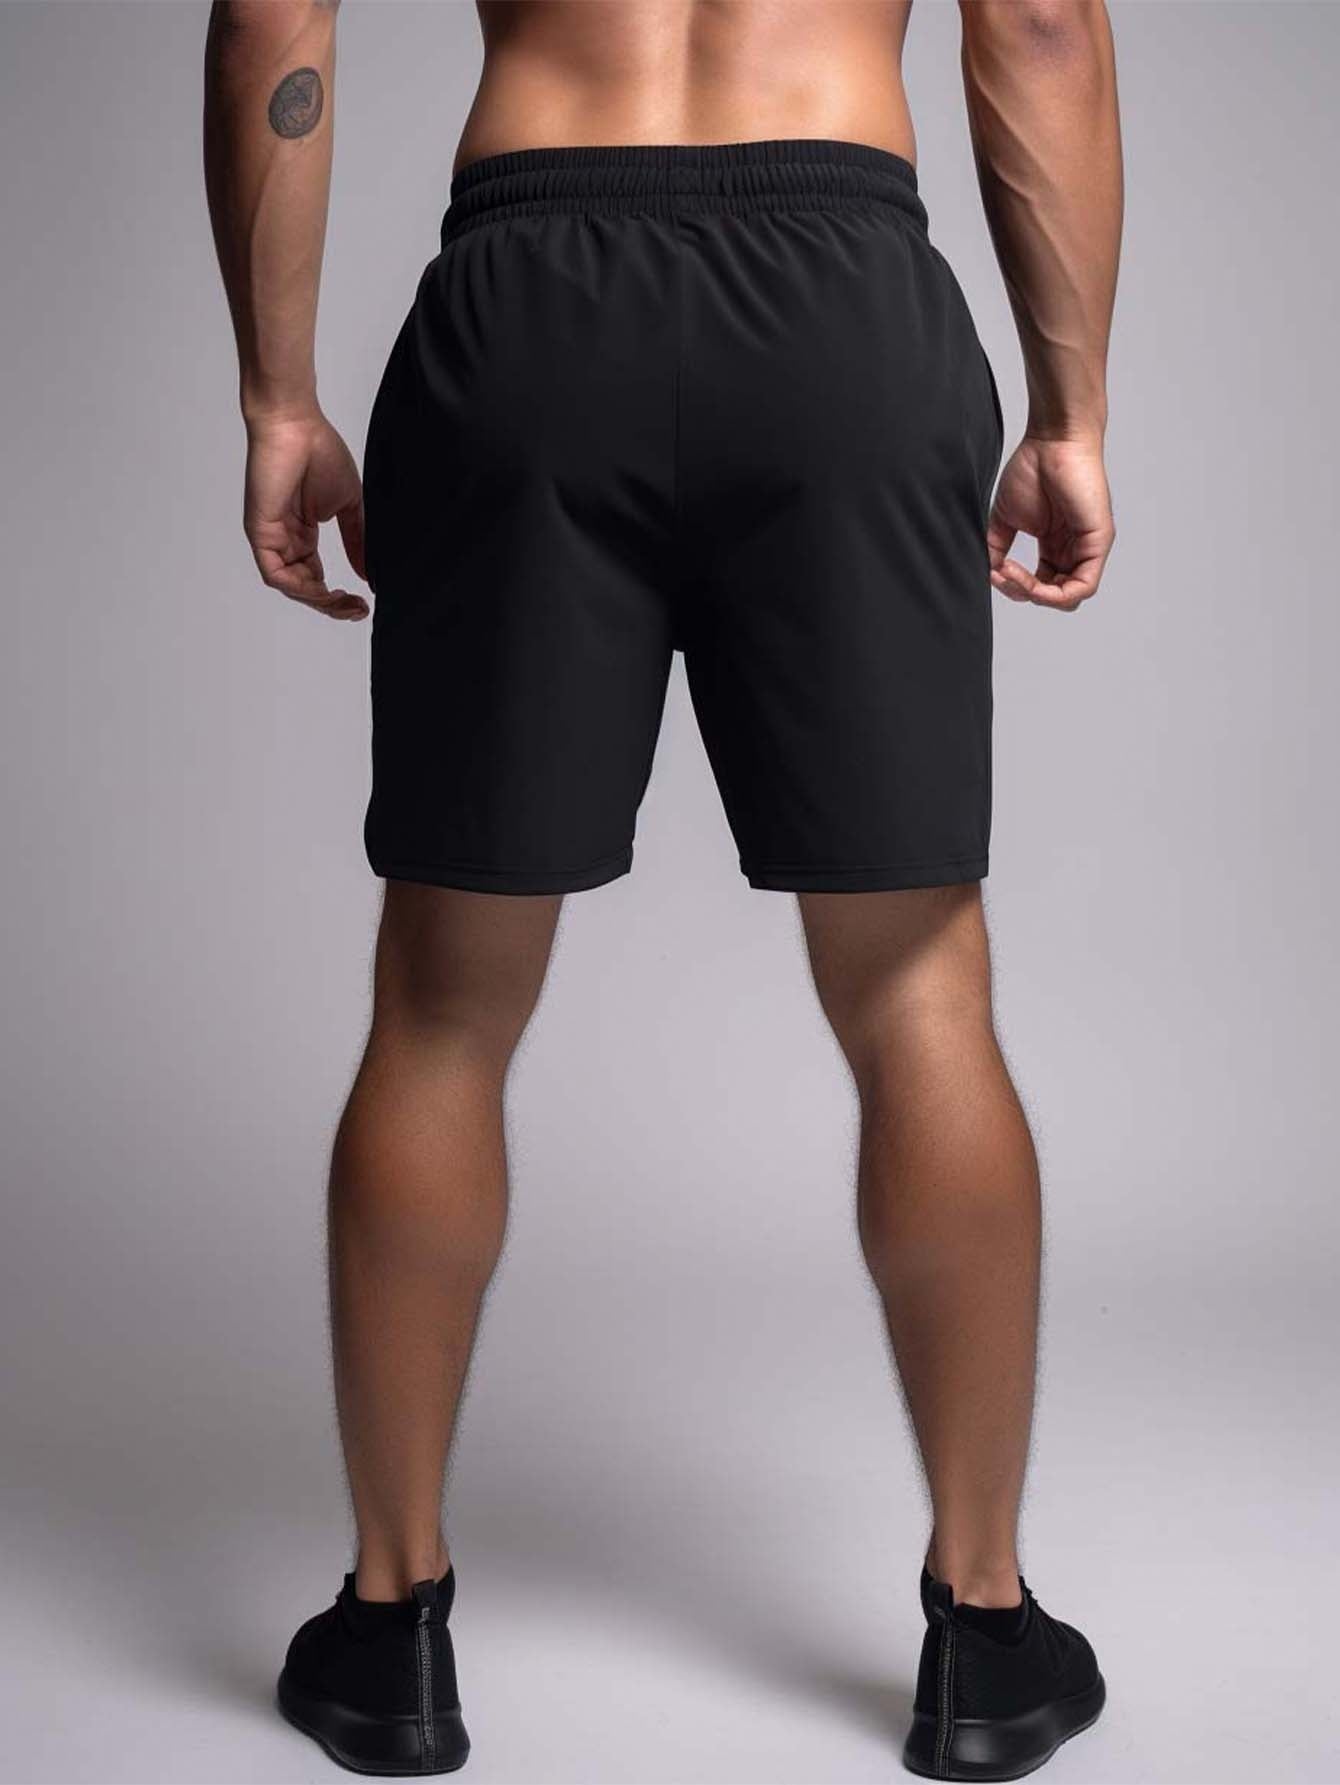 What God Knows About Me Is More Important Plus Size Men's Christian Shorts claimedbygoddesigns